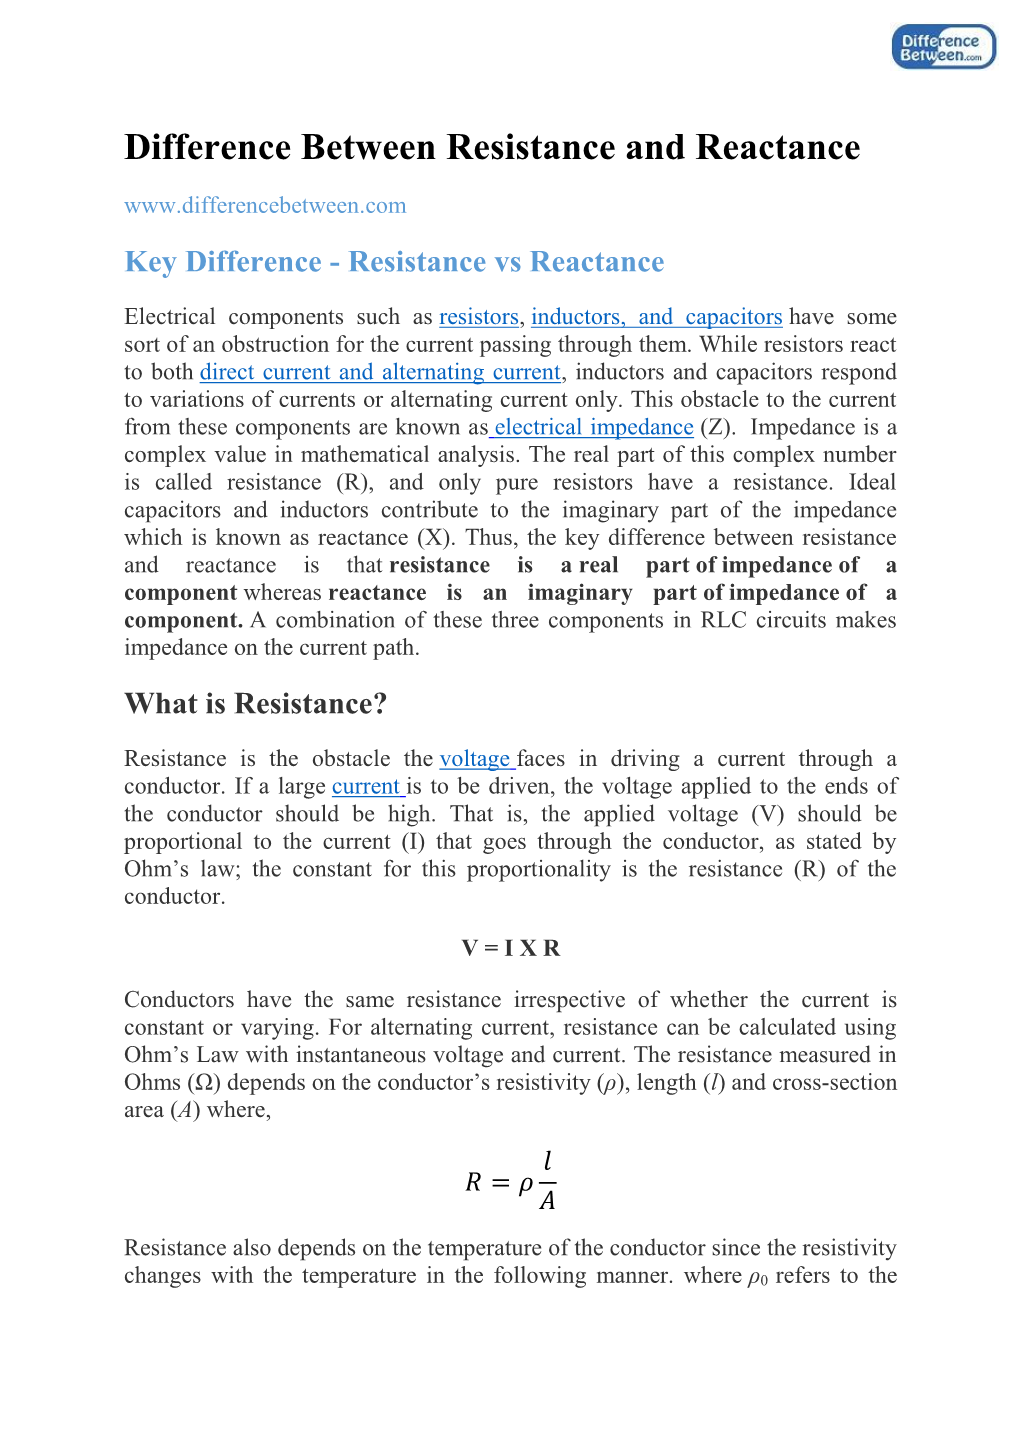 Difference Between Resistance and Reactance Key Difference - Resistance Vs Reactance